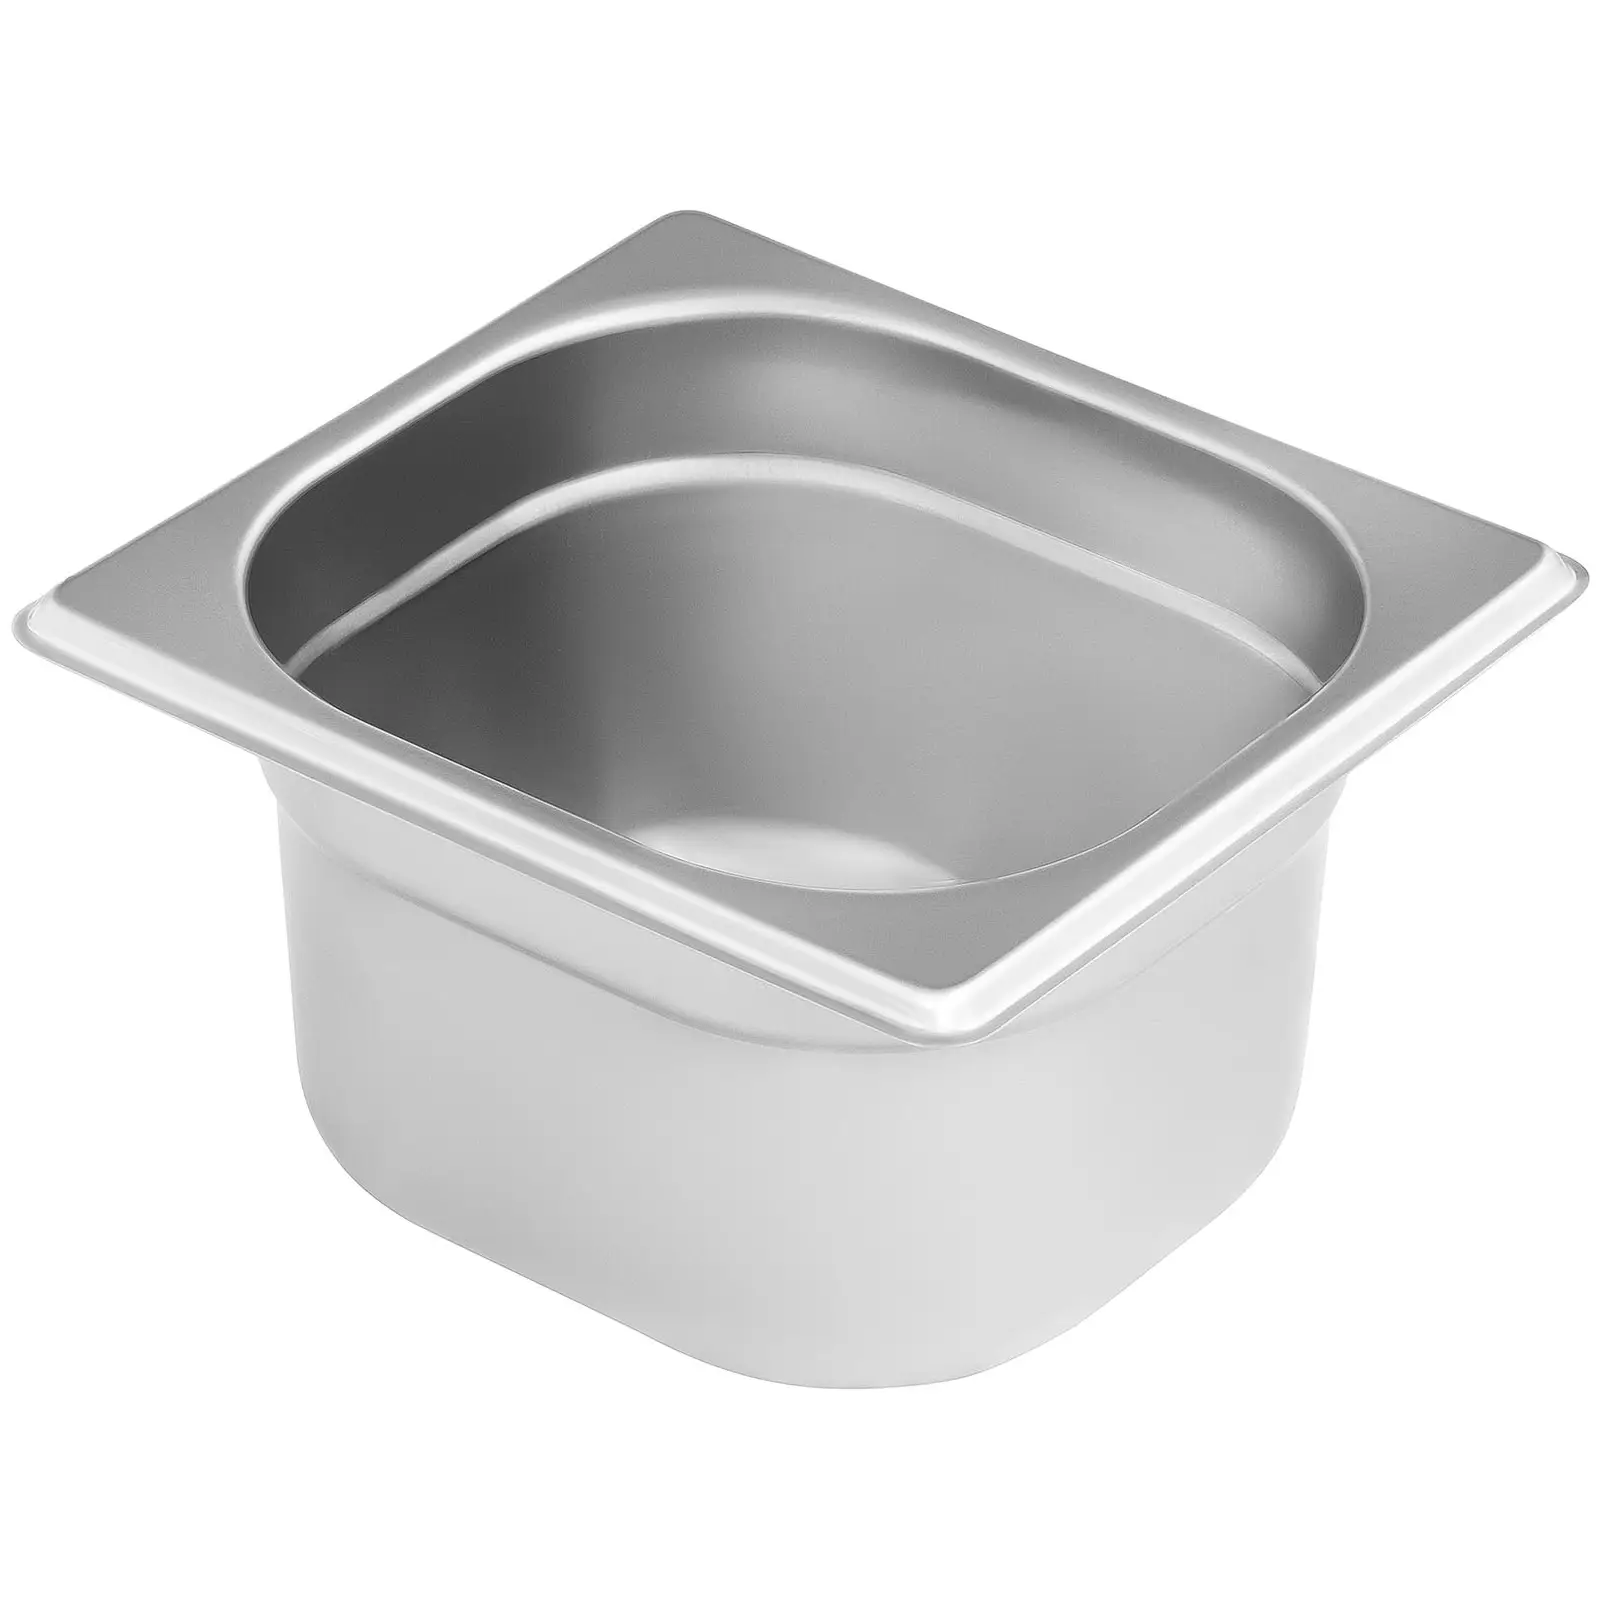 Gastronorm Pan Holder - Incl. 5 GN 1/6 Gastronorm Containers with Lids